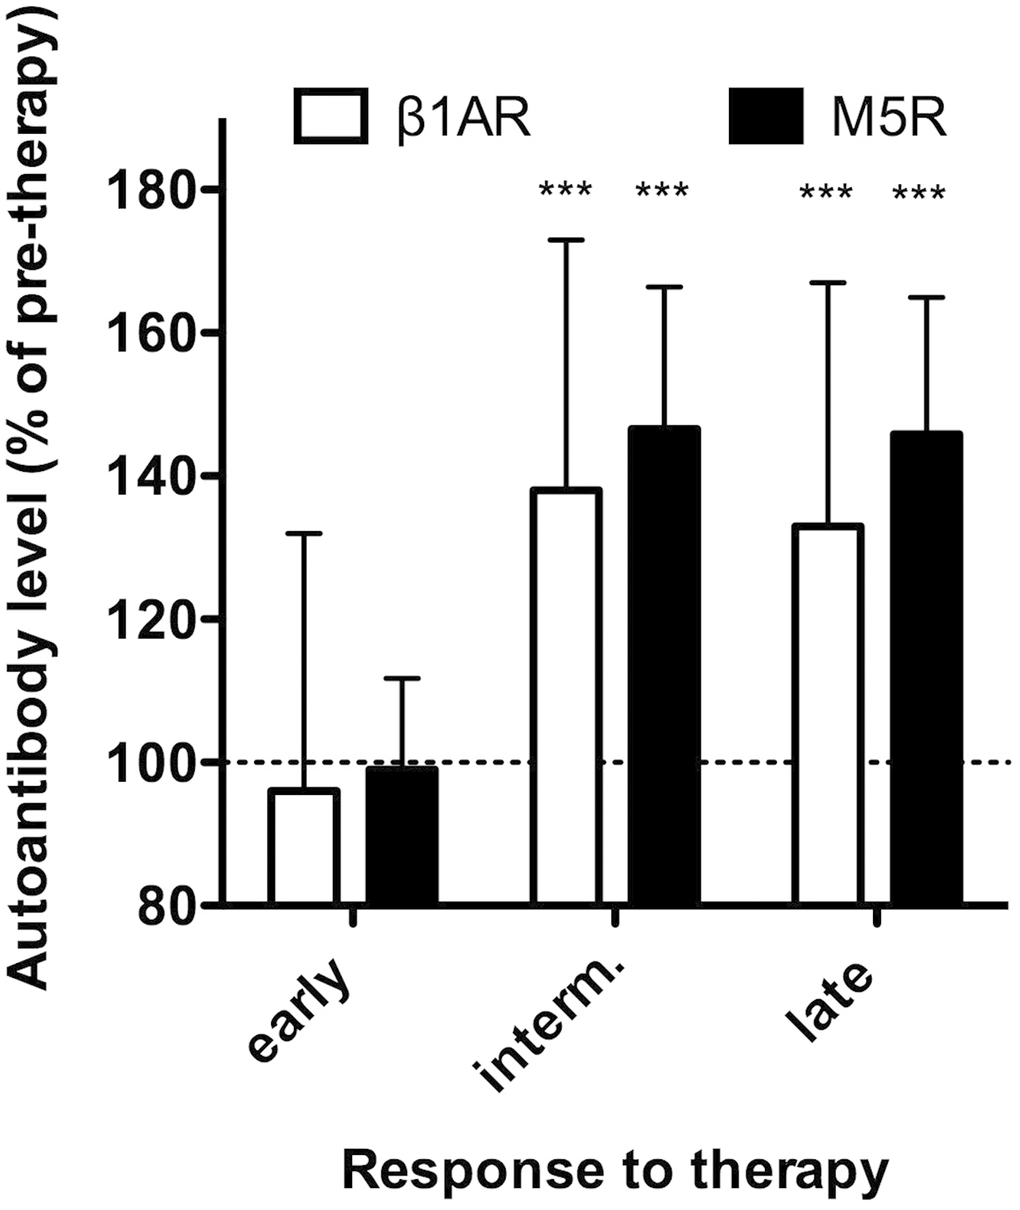 Response of β1AR- and M5R-Aabs to therapy. Serum levels of β1AR-Aabs (white) were measured by IgG-binding to a cyclic peptide representing the presumed pathogenic conformational auto-epitope within the second extracellular loop of the receptor. M5R-Aabs (black) were measured by IgG-binding to the native receptors (CellTrend GmbH). Values obtained at 5 and 17 weeks after therapy (early), 30 and 44 weeks after therapy (intermediate) and 58 to 112 weeks after therapy (late) are normalized to pre-therapeutic values (dotted line). Data of n=66 patients undergoing complete follow up are given as median ± interquartile range. *** indicate differences to pre-therapy values at p 